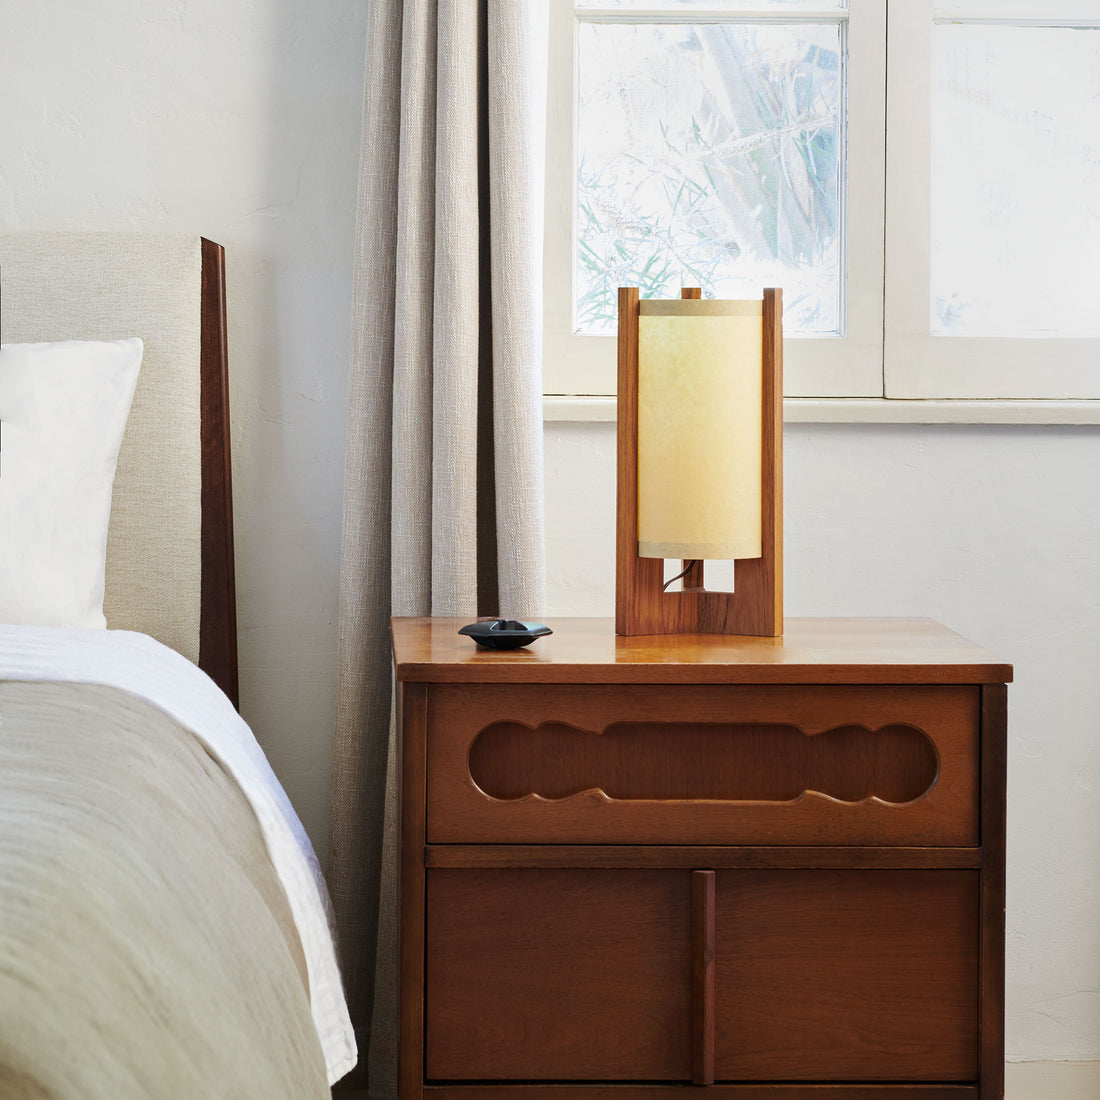 Teak Table Lamp with Sand Lampshade on nightstand next to bed and window